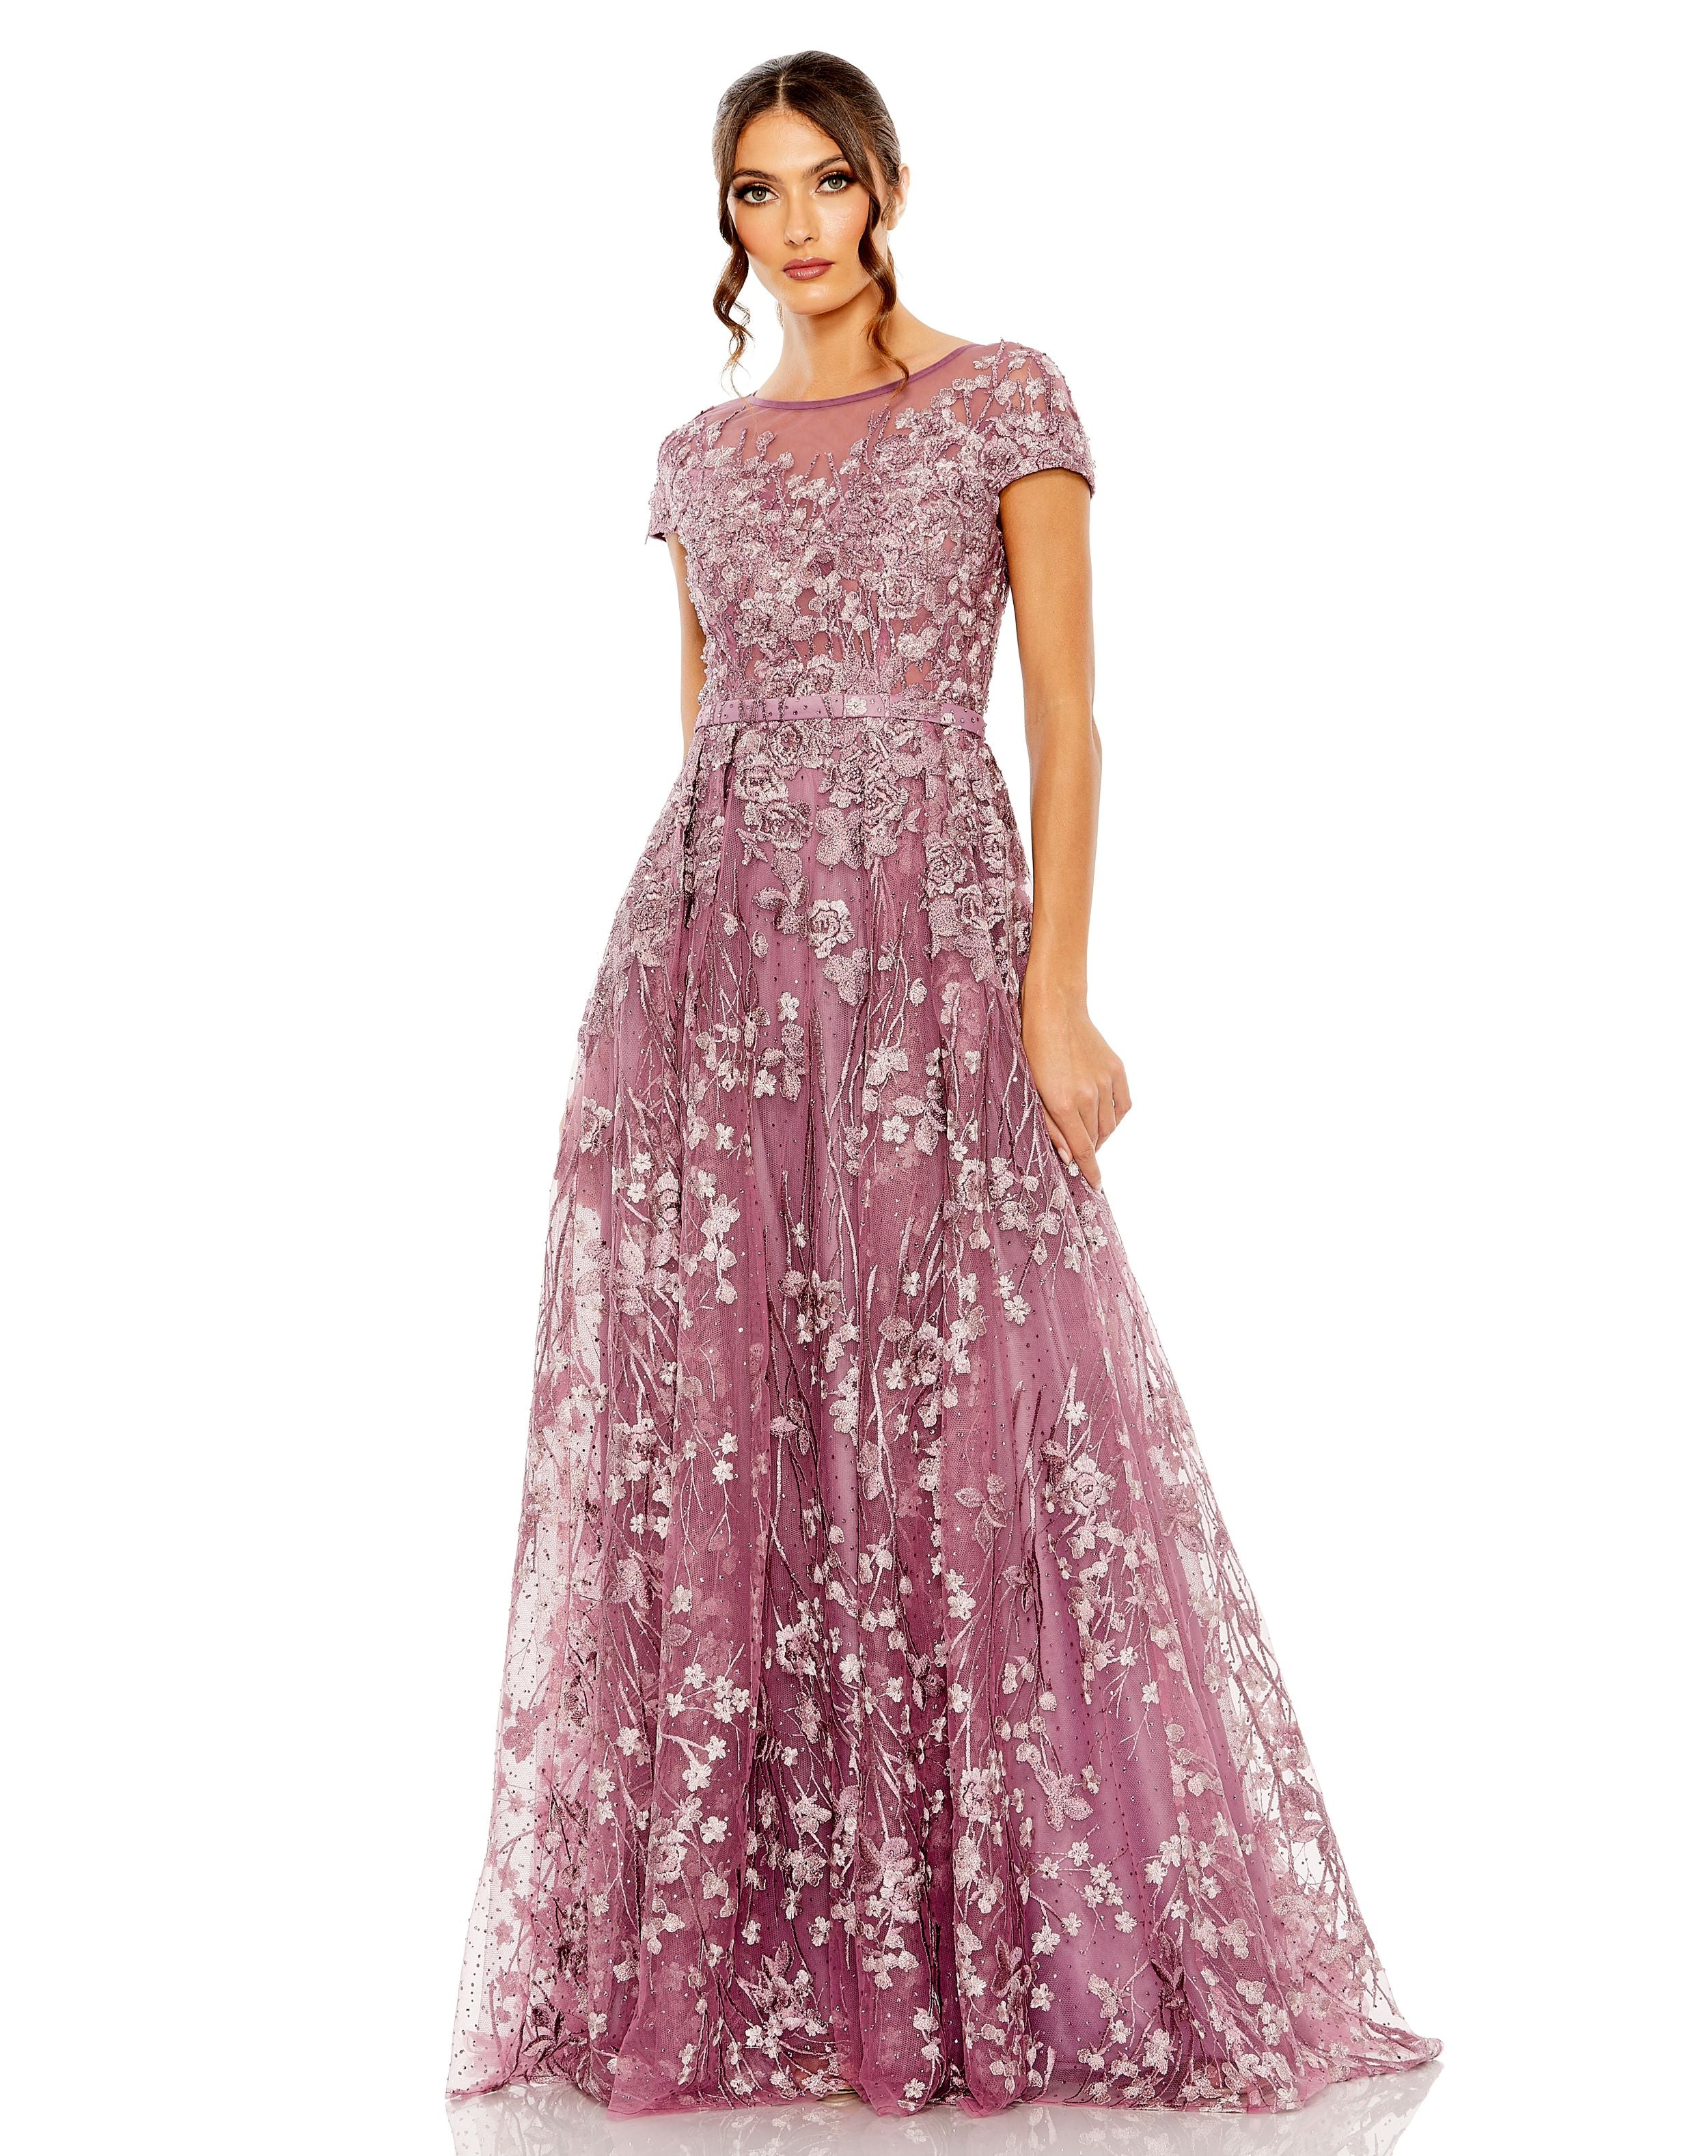 Embellished Floral Cap Sleeeve A Line Gown